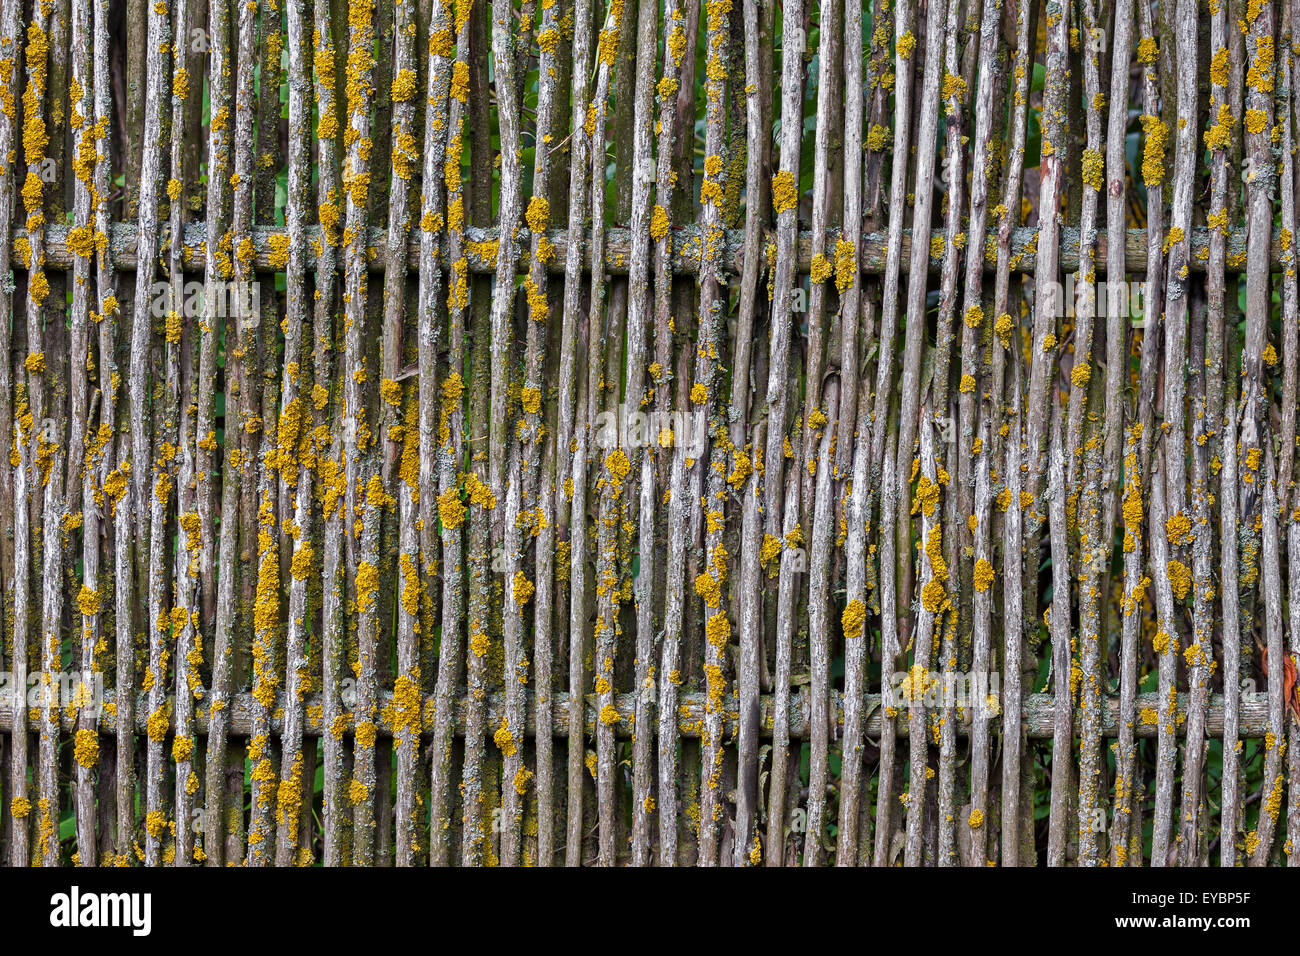 Wooden weathered and mossy fence background Stock Photo